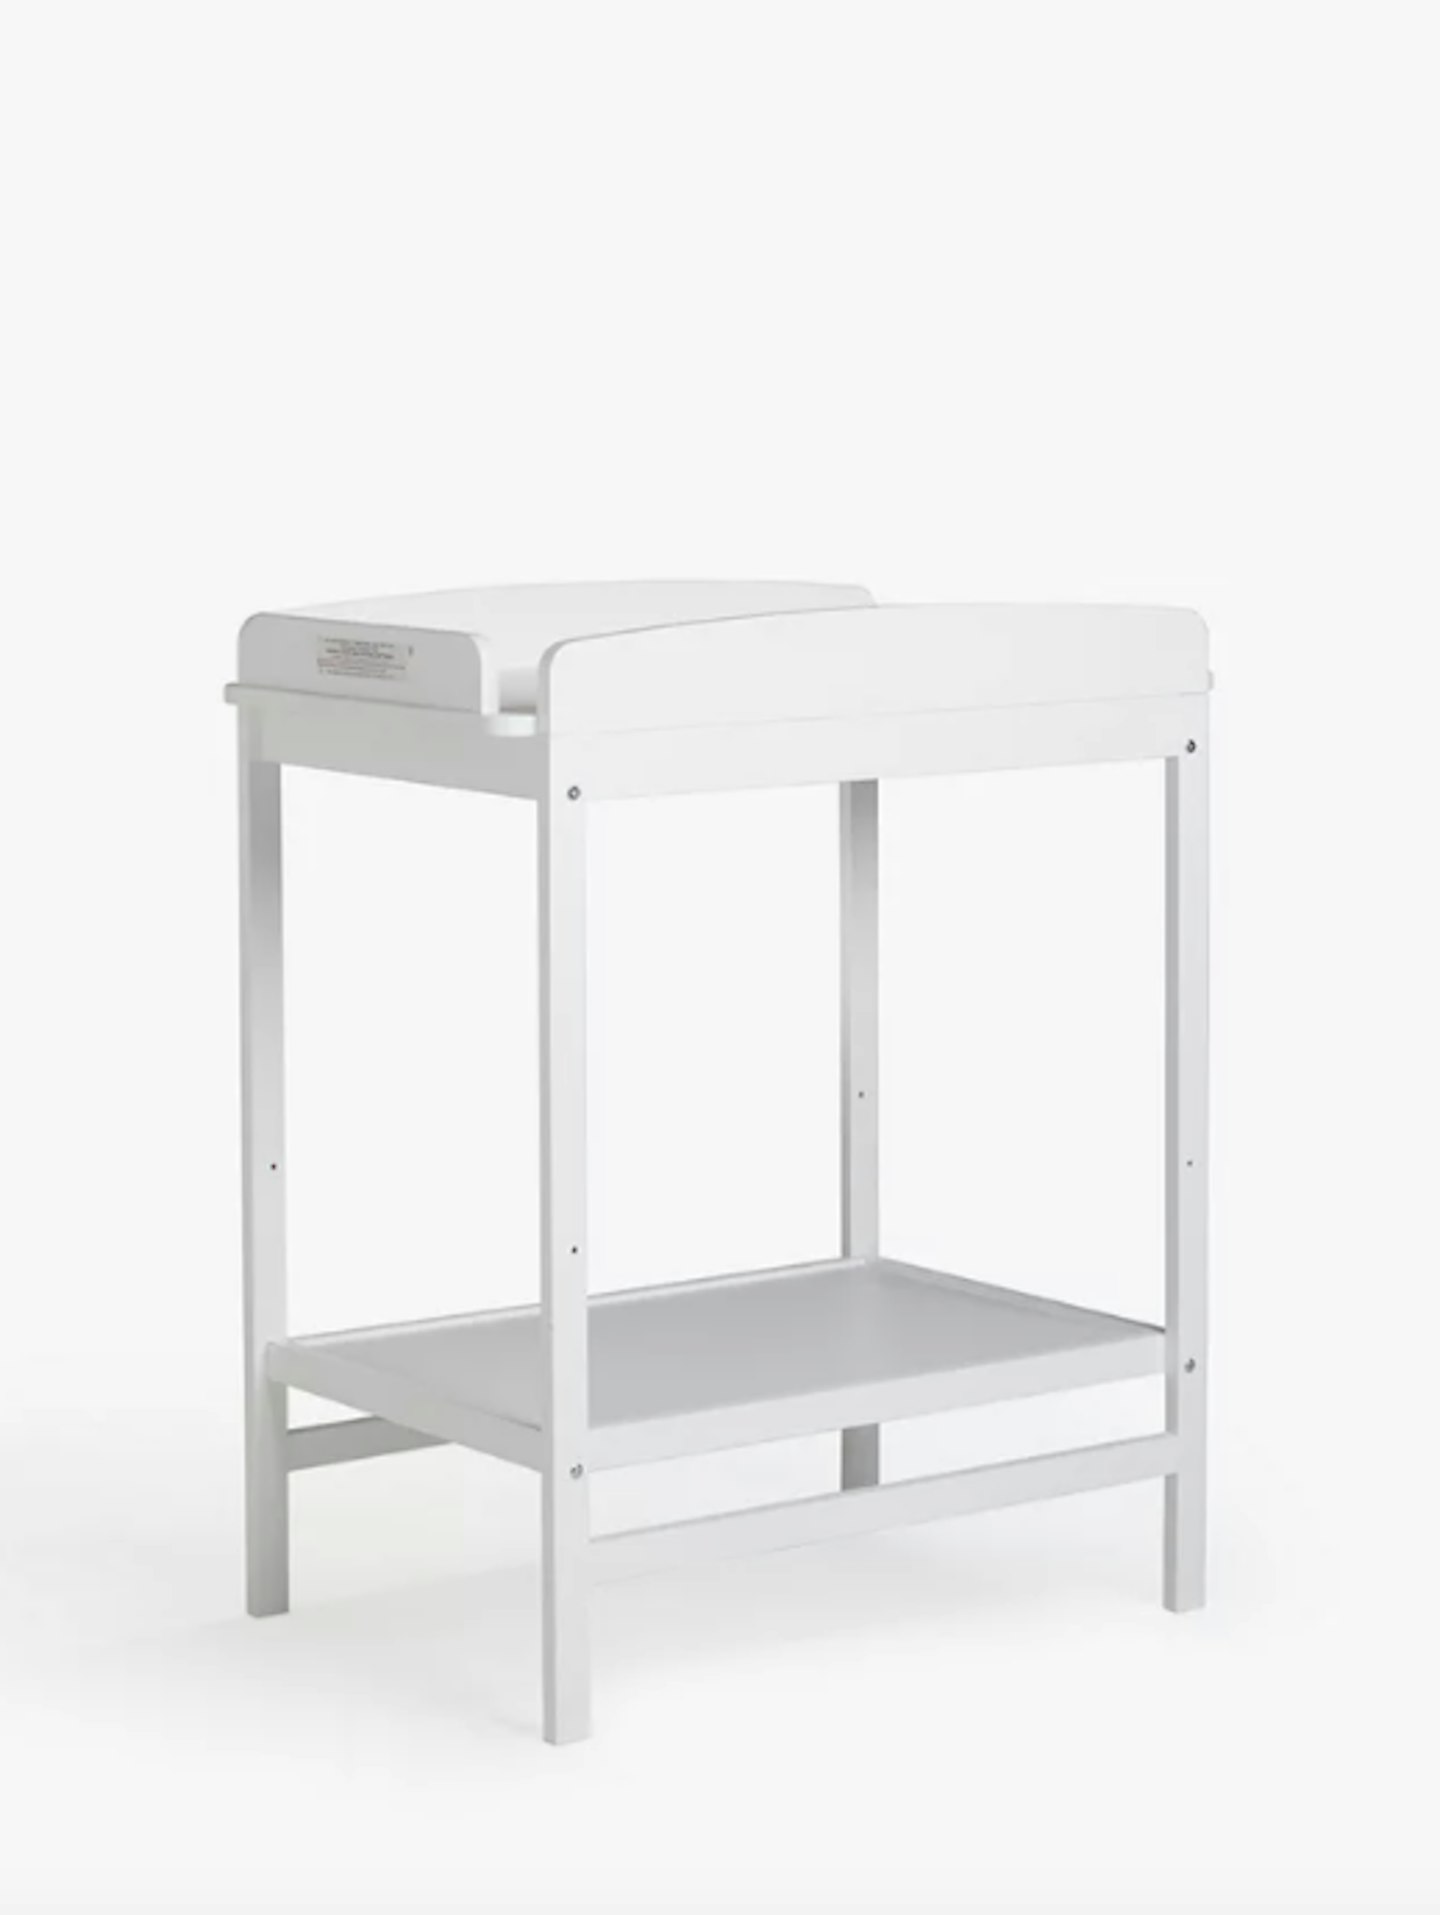 Elementary Changing Table, £59